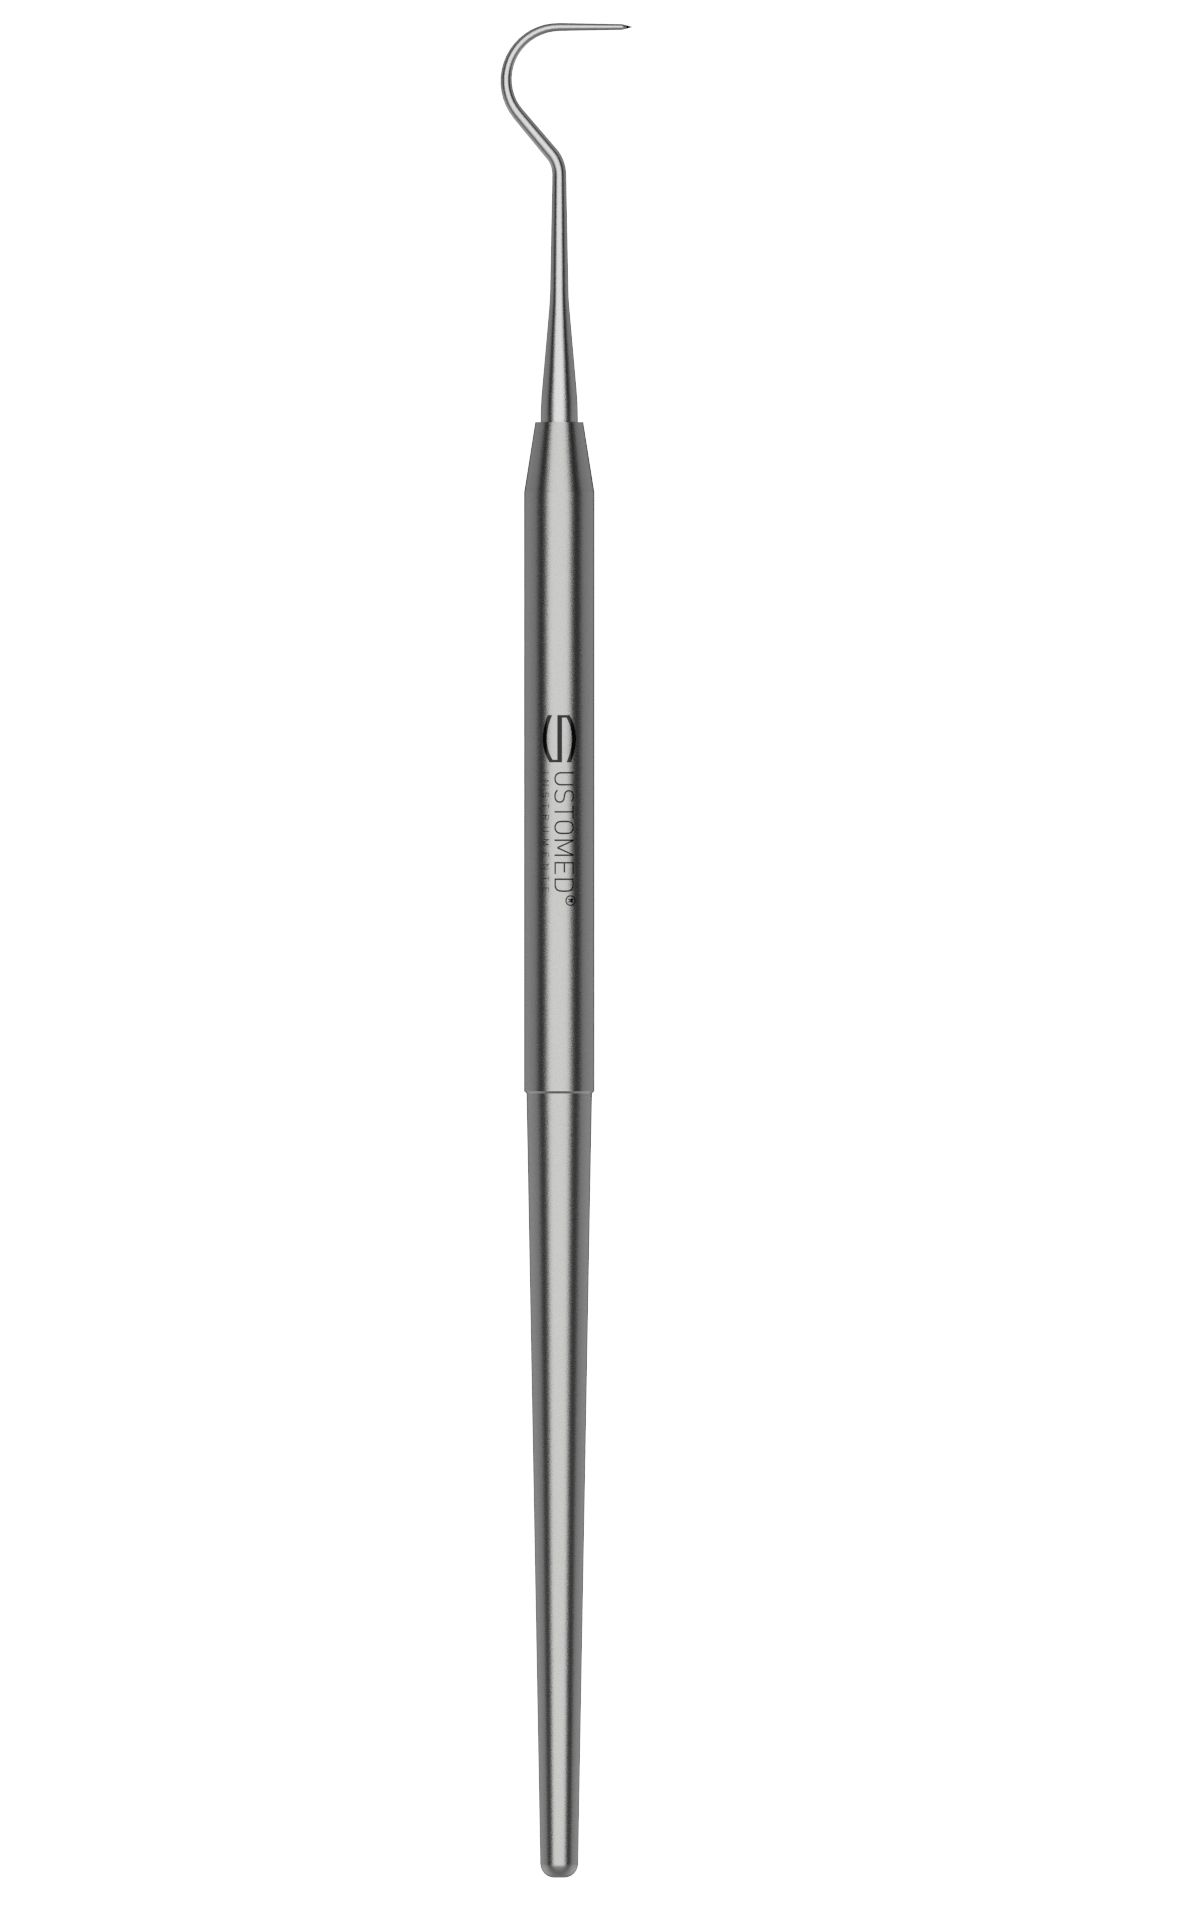 Probe, size 44, single-ended, round handle